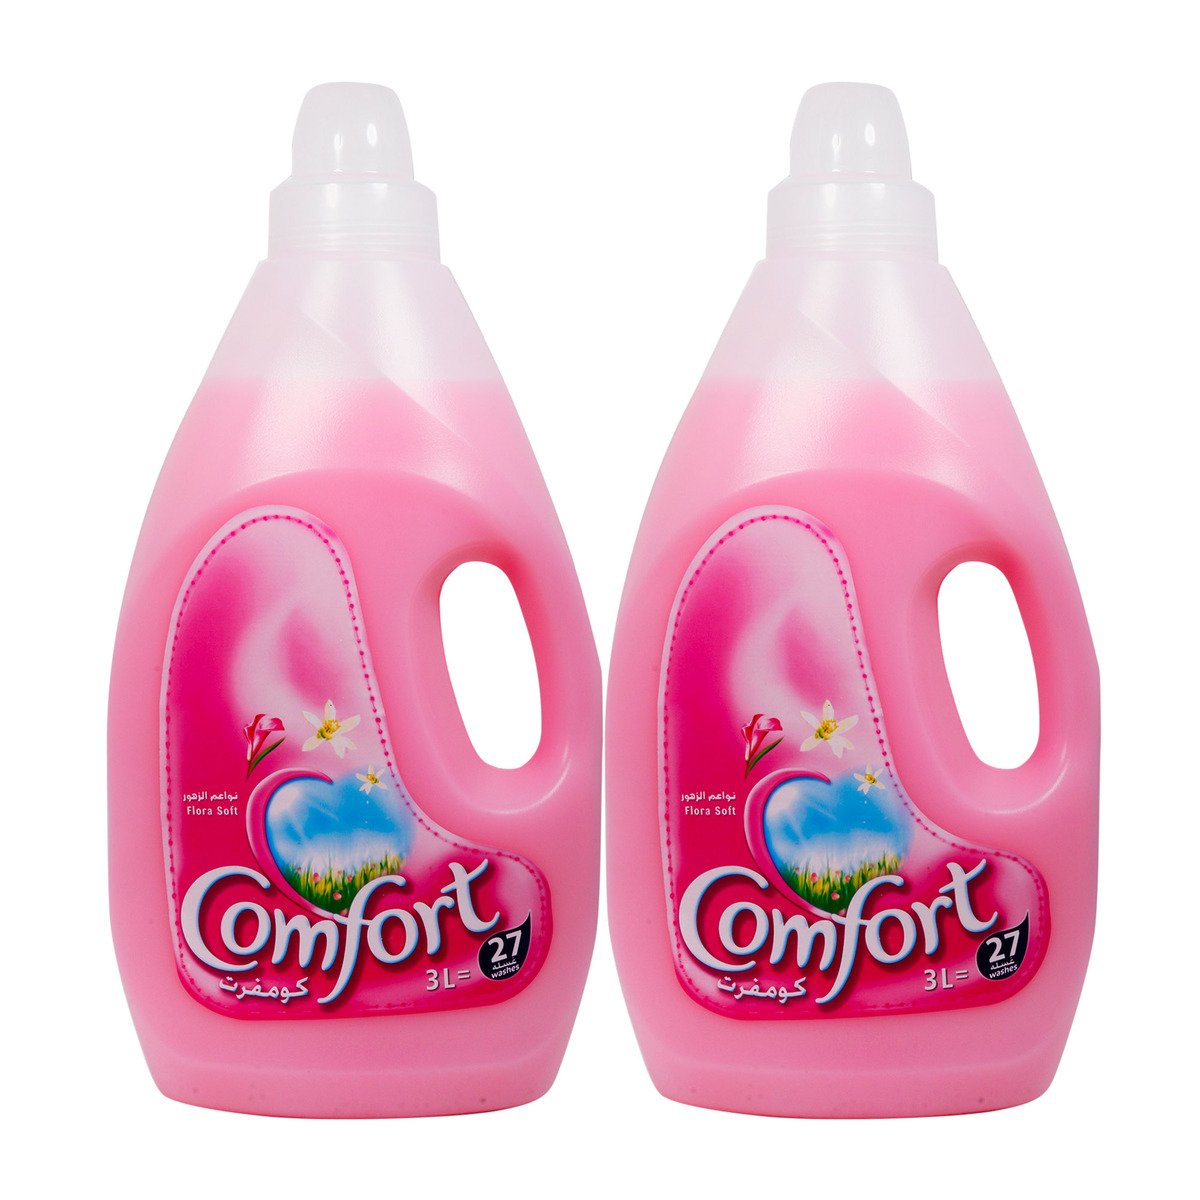 Comfort Ultimate Care Concentrated Fabric Softener Orchid & Musk 2 x 1Litre  Online at Best Price, Fabric softener concentrate